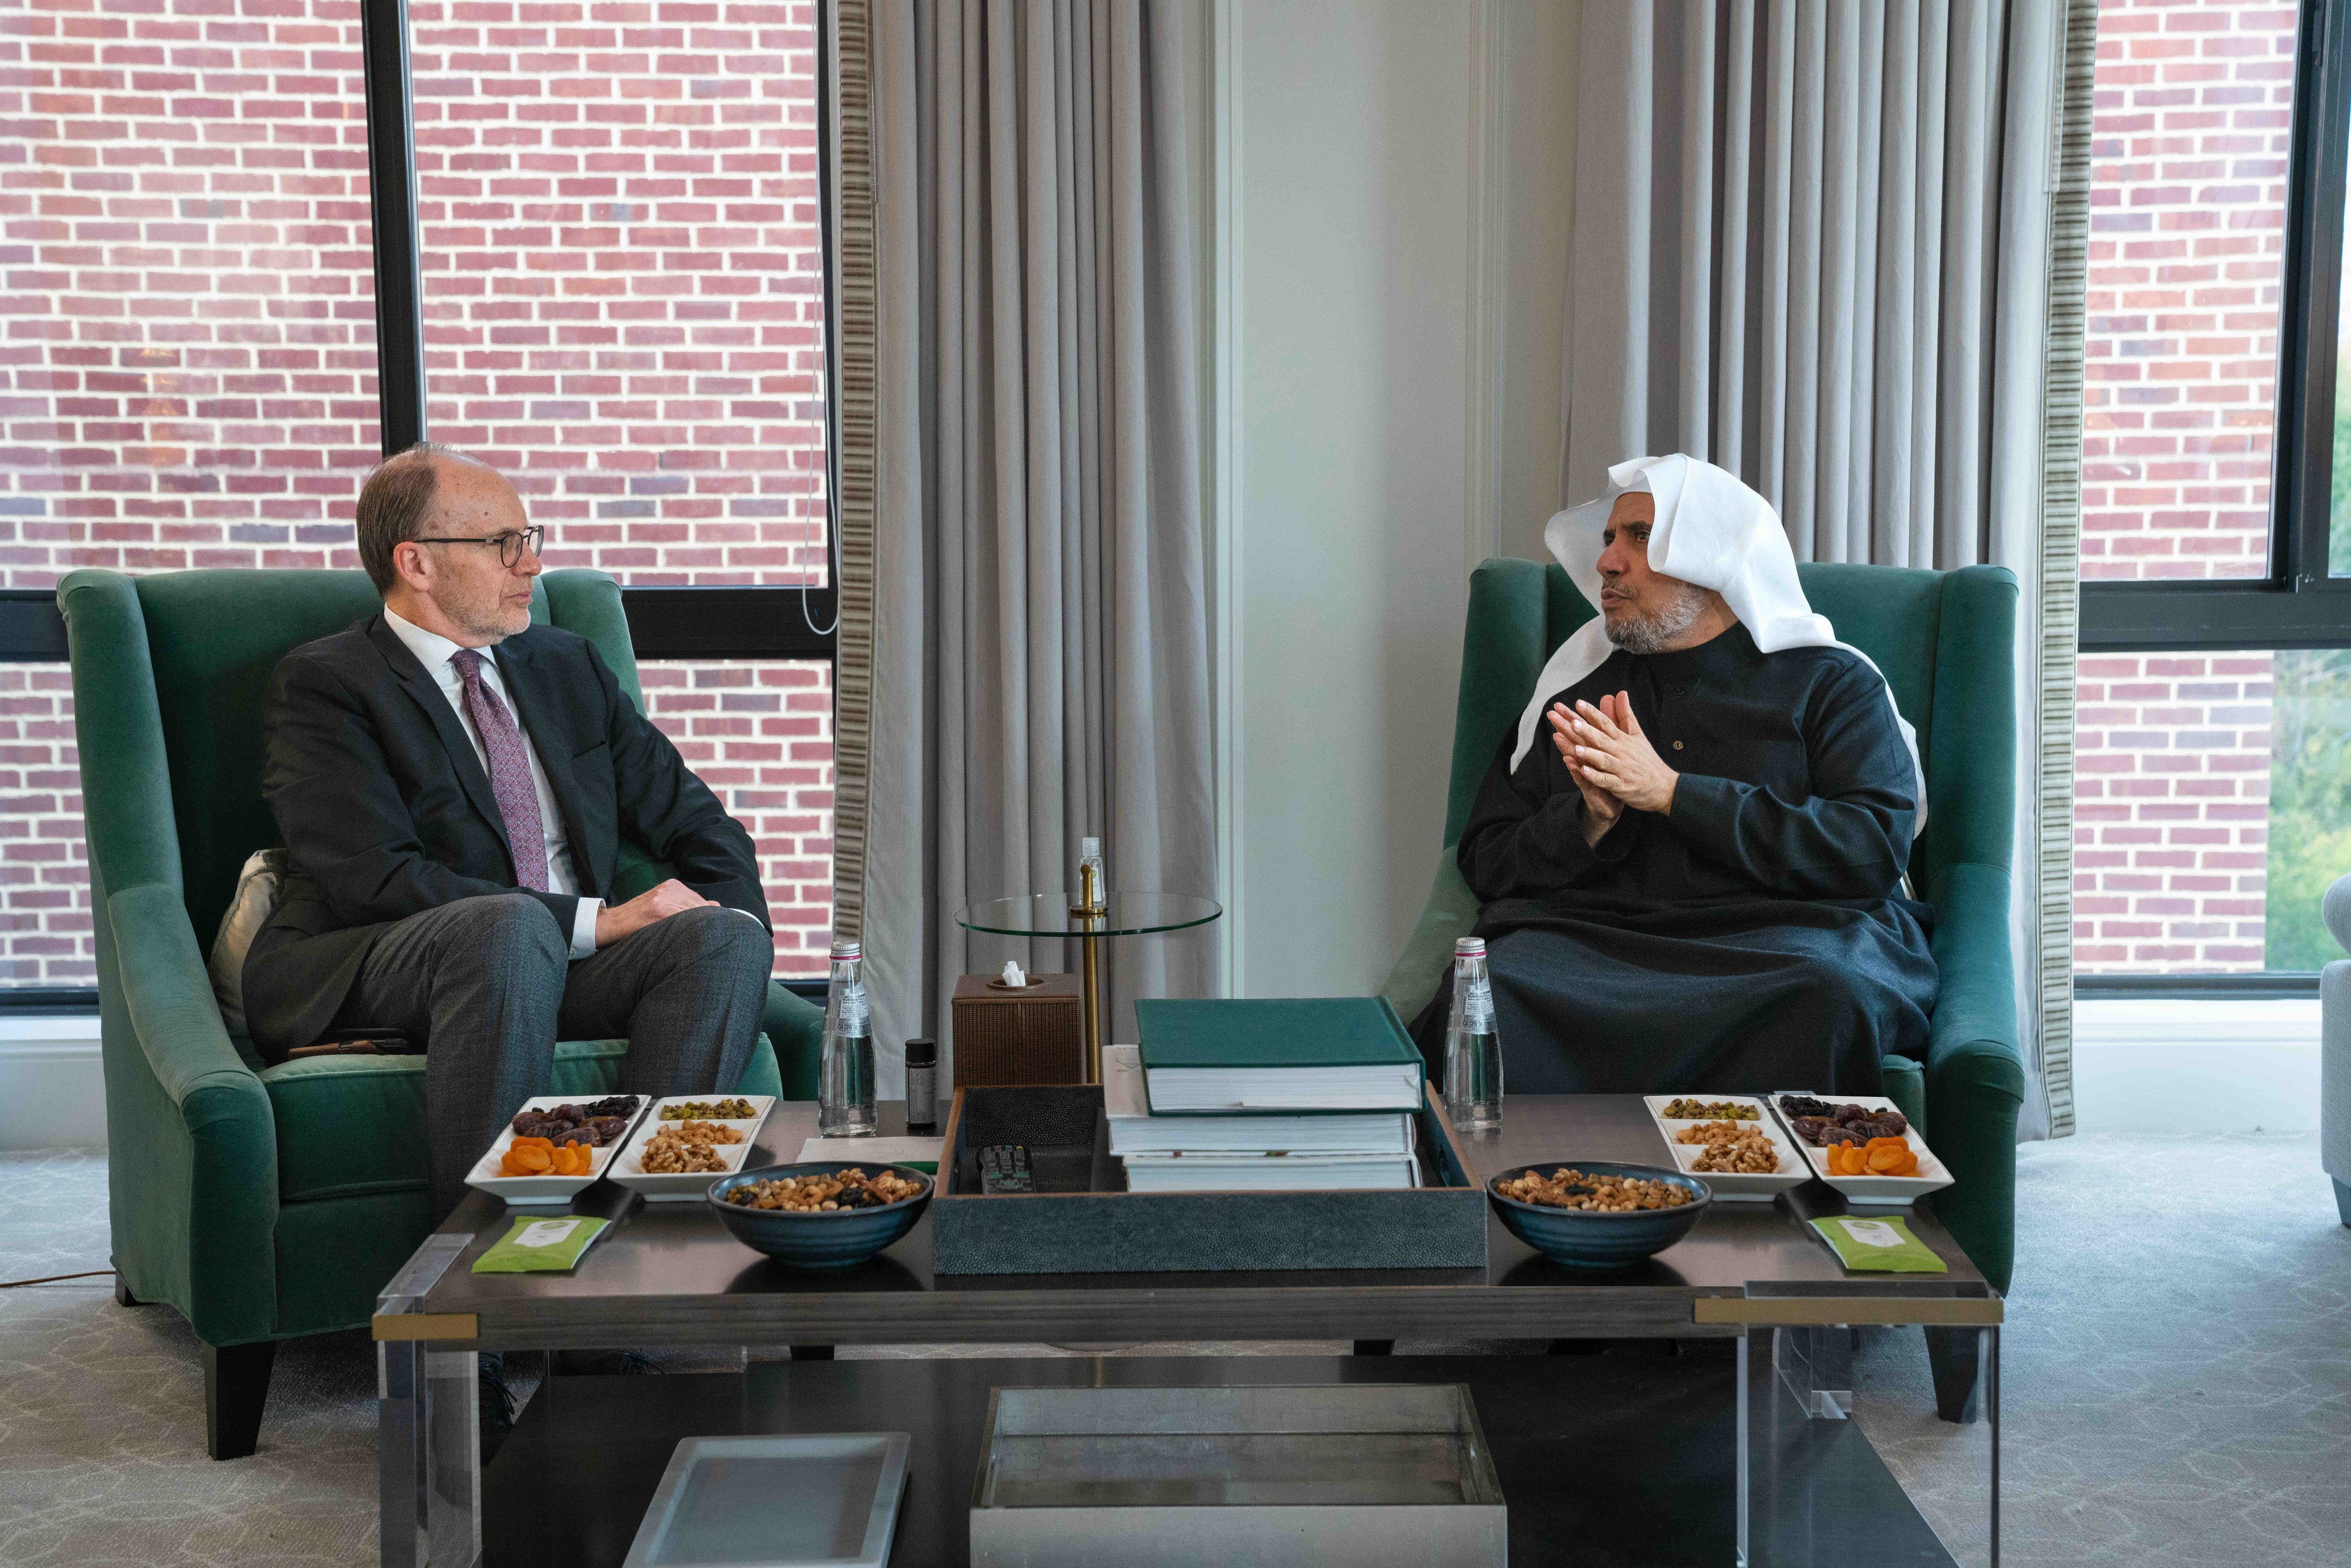 His Excellency Dr. Mohammad Alissa hosted the President of the Gulf StatesInst in Washington, Ambassador Douglas Silliman